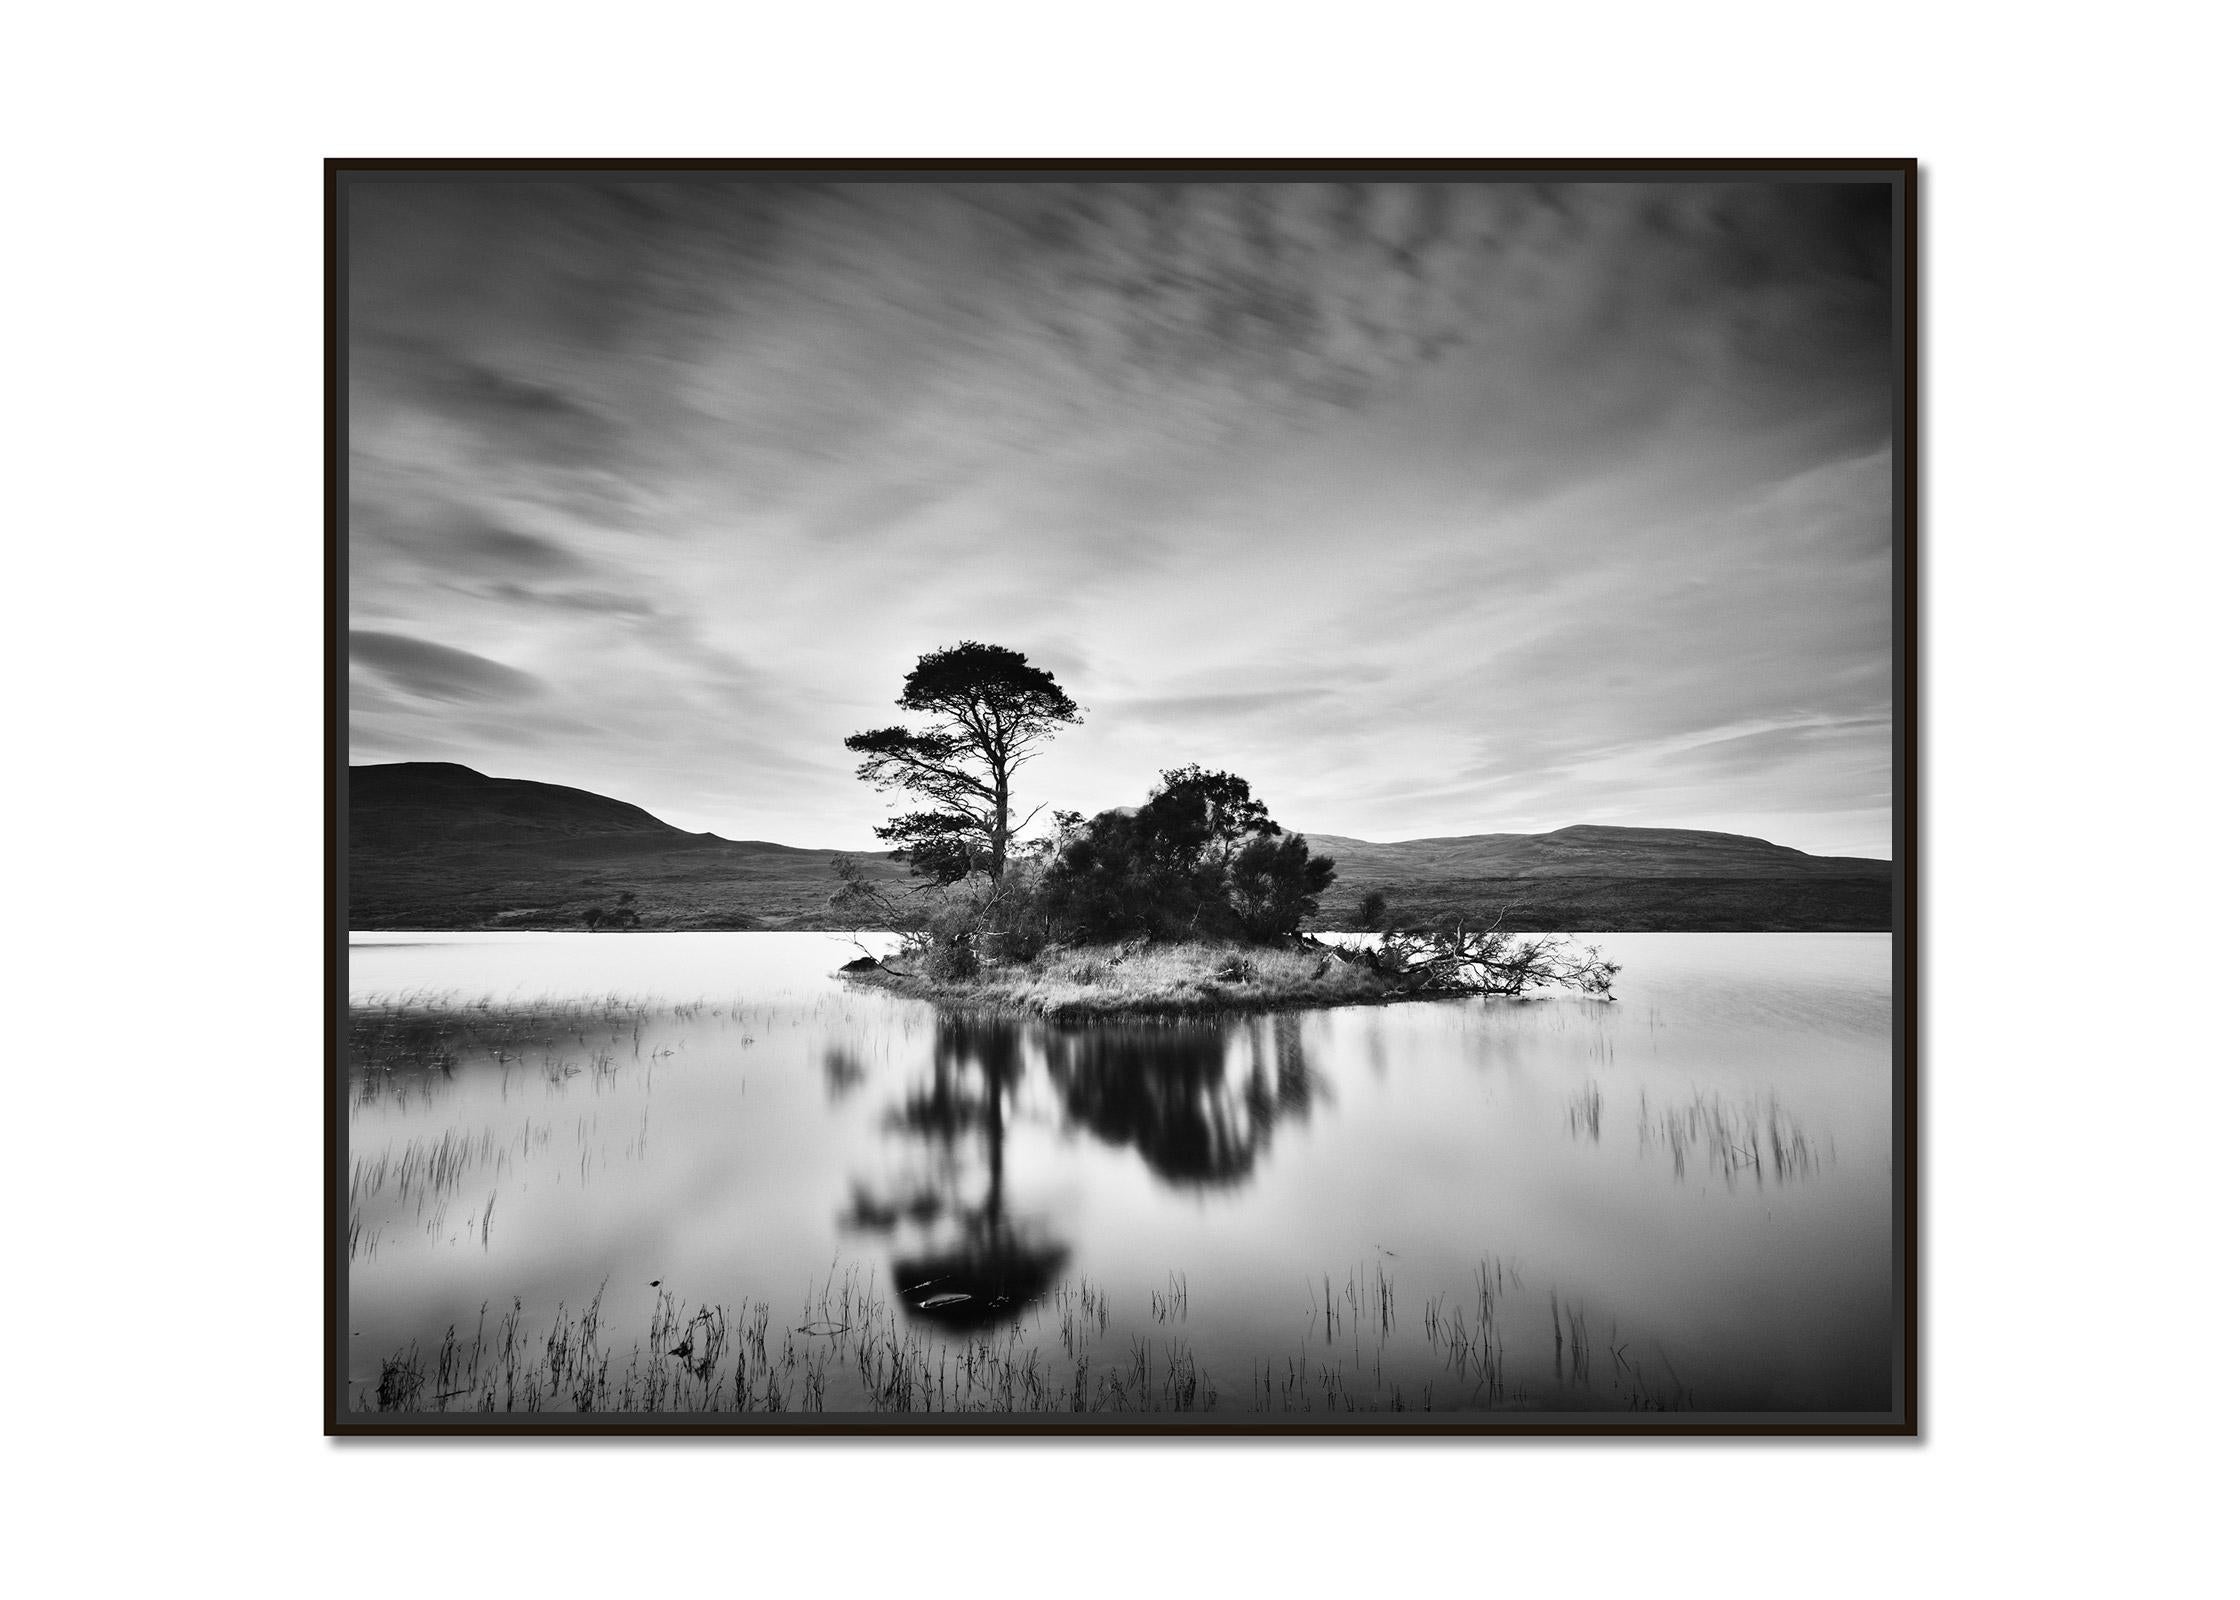 After the Sunset Scotland Mountain Lake minimalist black white landscape print - Photograph by Gerald Berghammer, Ina Forstinger